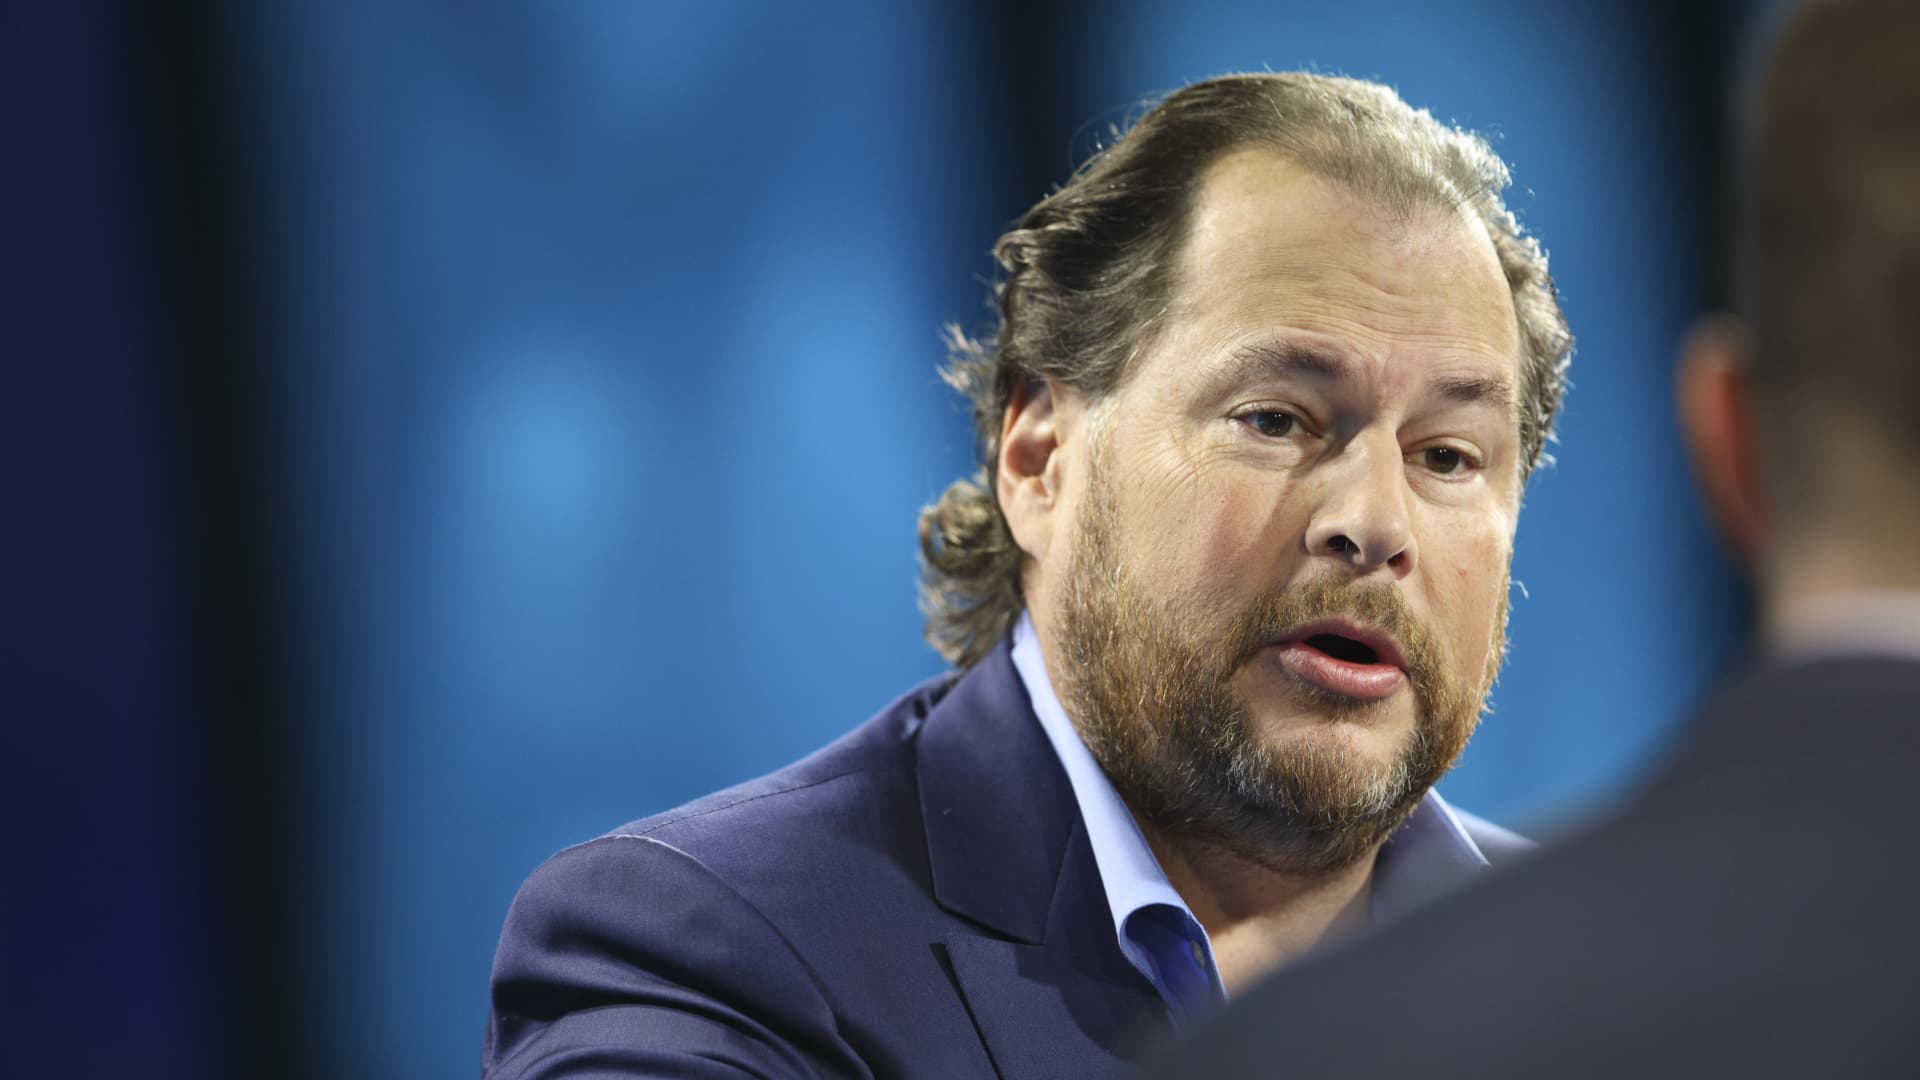 Salesforce executive exits help push stock to its lowest point since March 2020 - CNBC : With Stewart Butterfield's departure from Slack on Monday, Salesforce shares continued a drop from last week, spurred by the exit of co-CEO Bret Taylor.  | Tranquility 國際社群